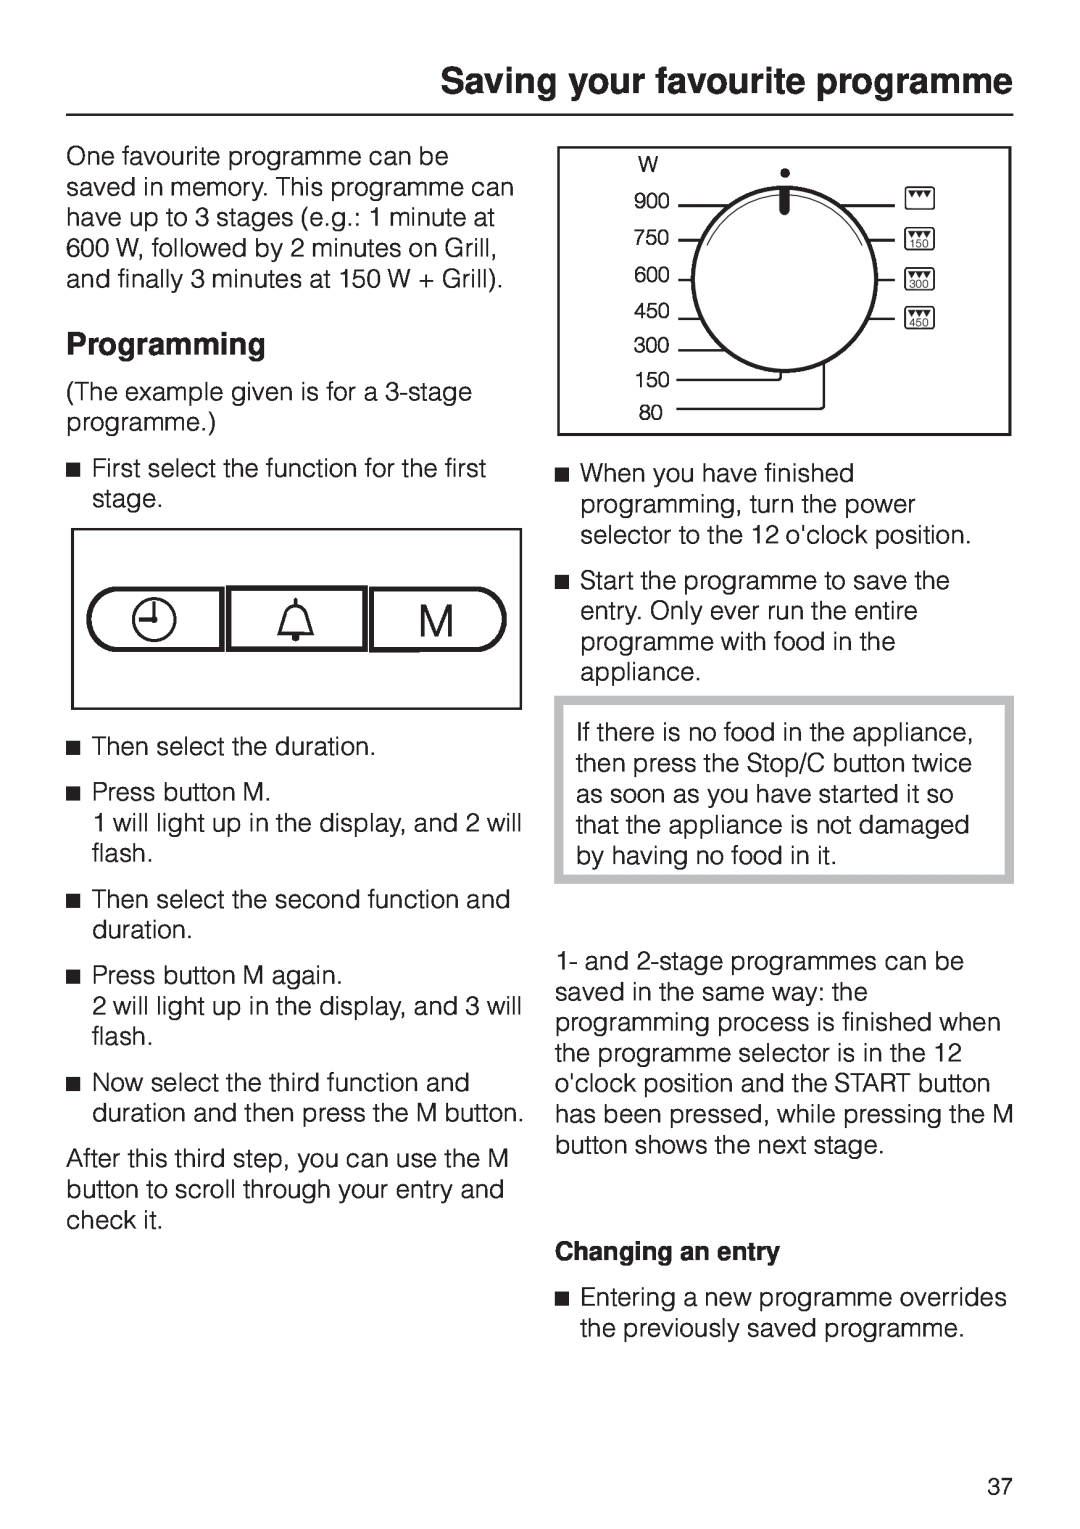 Miele M 8261 manual Saving your favourite programme, Programming, Changing an entry 